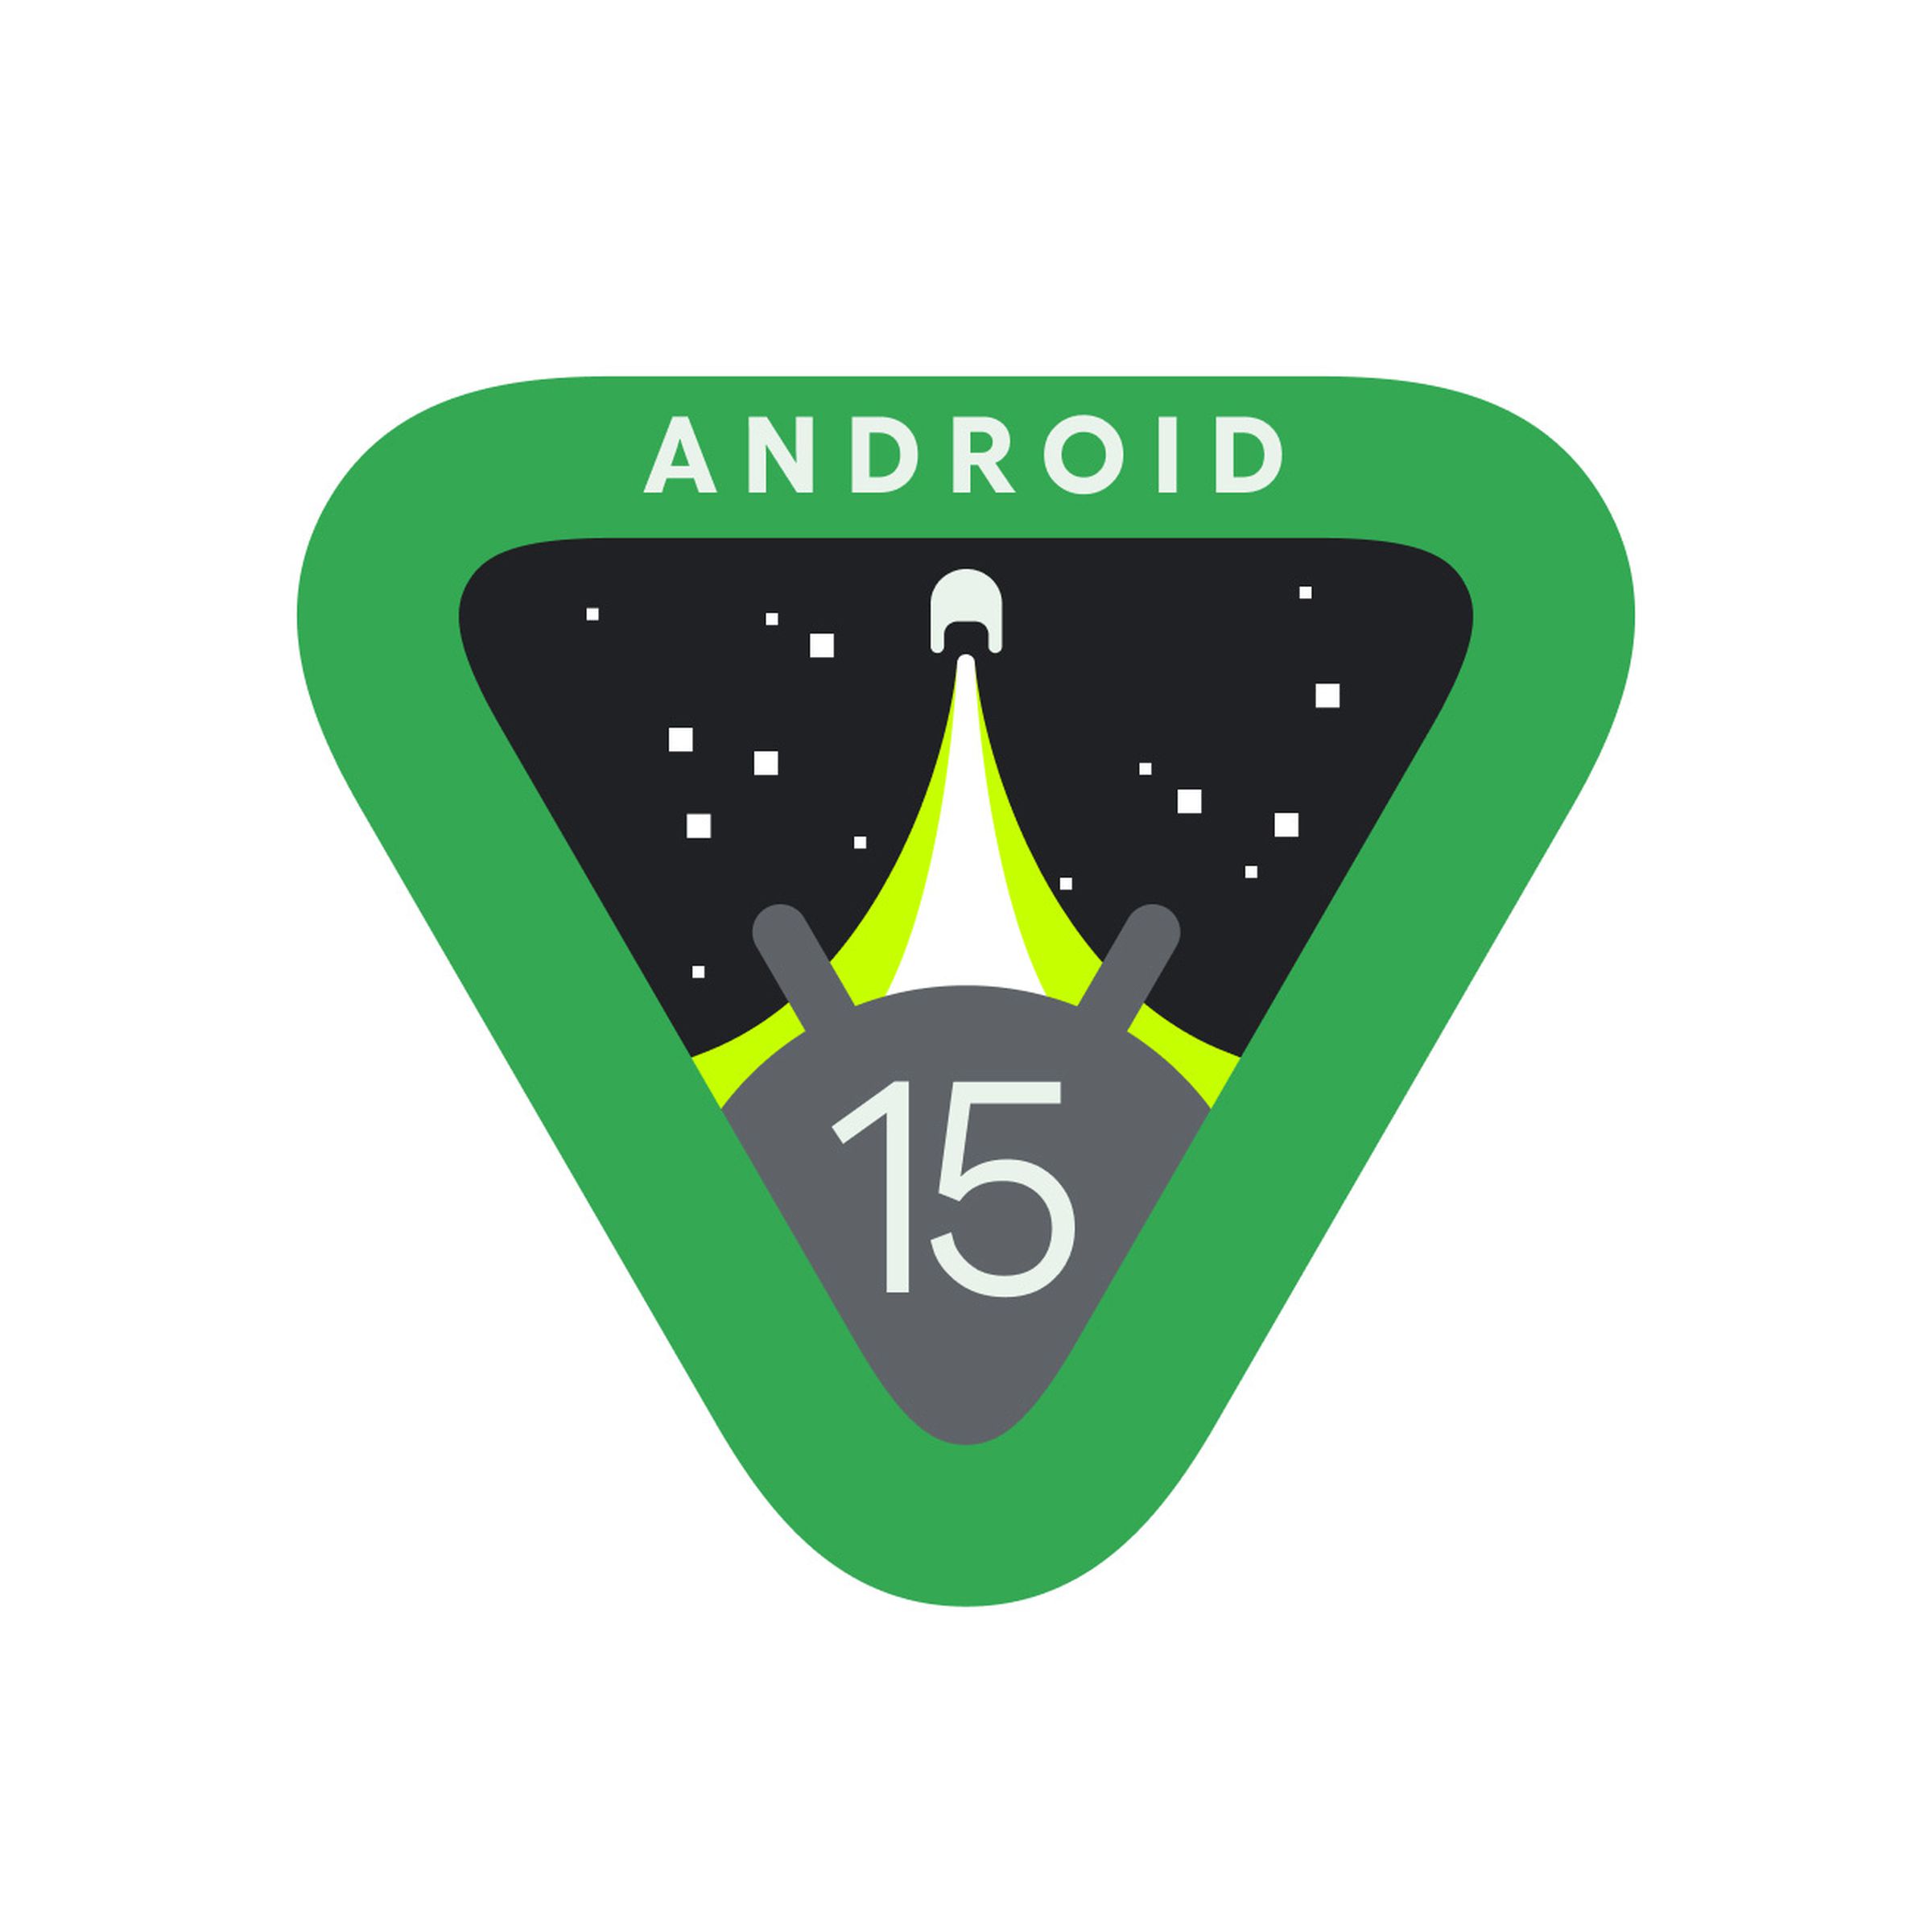 Android 15 logo with a v-shaped badge.